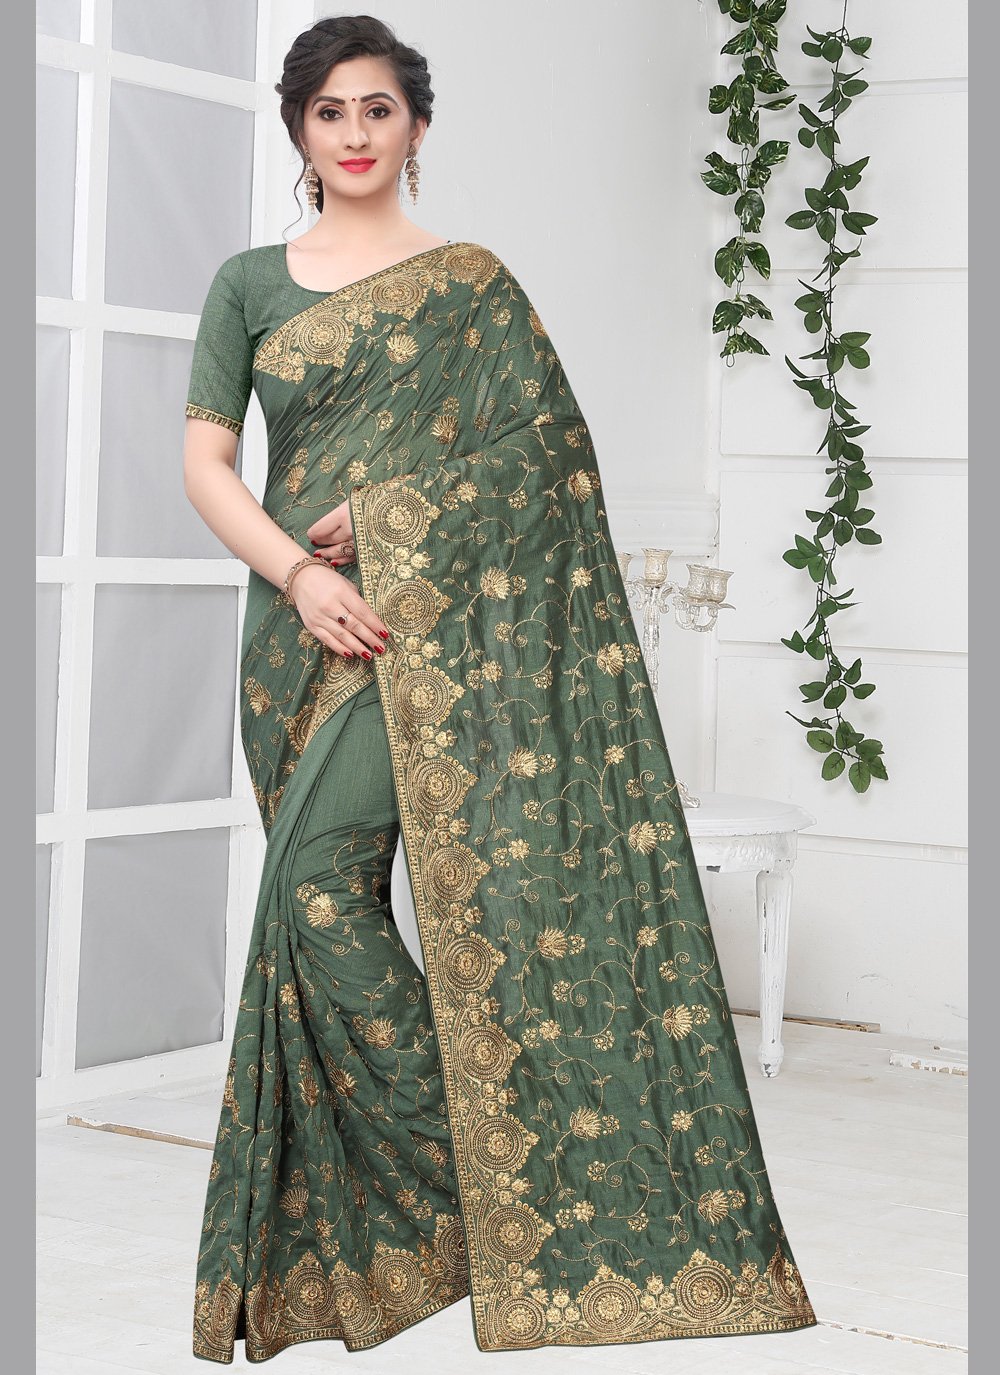 Saree Look for Party | How to Choose Saree for Parties?